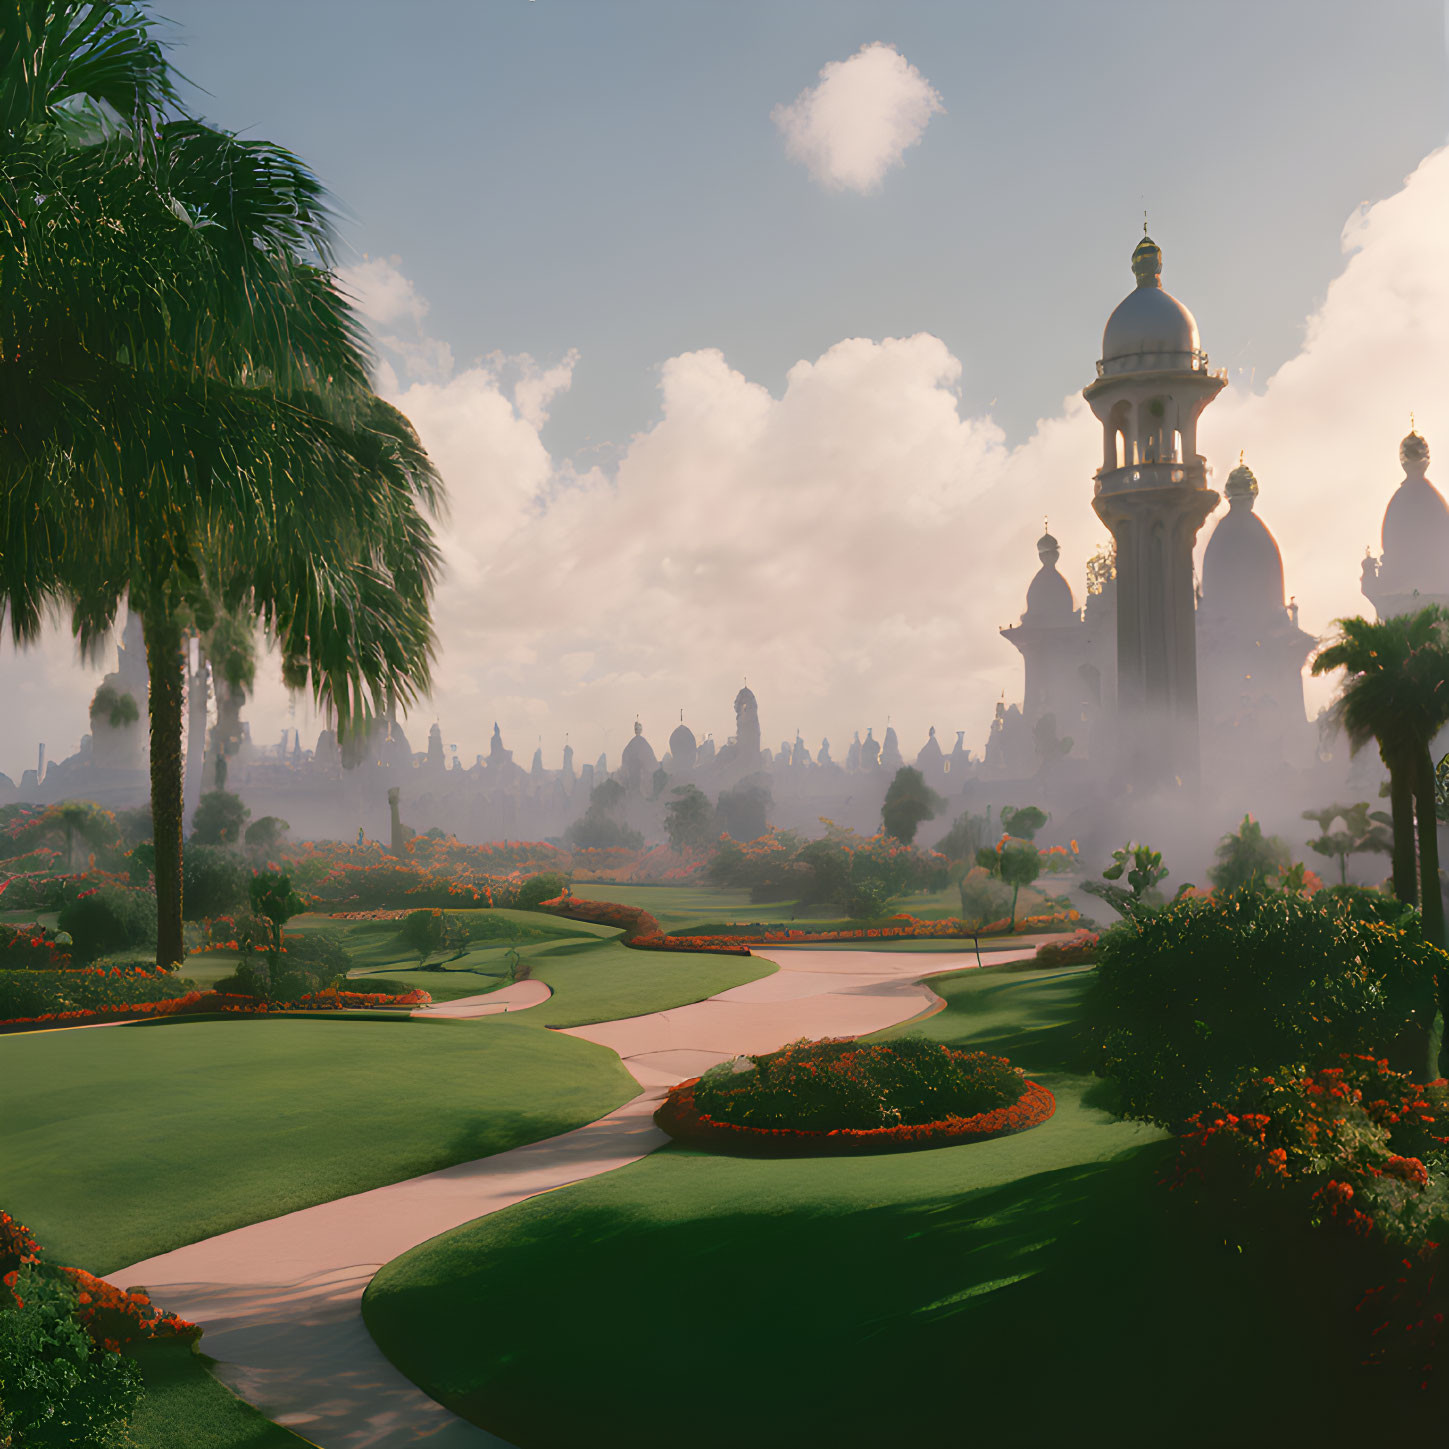 Misty fantasy landscape with lush gardens and ornate palace